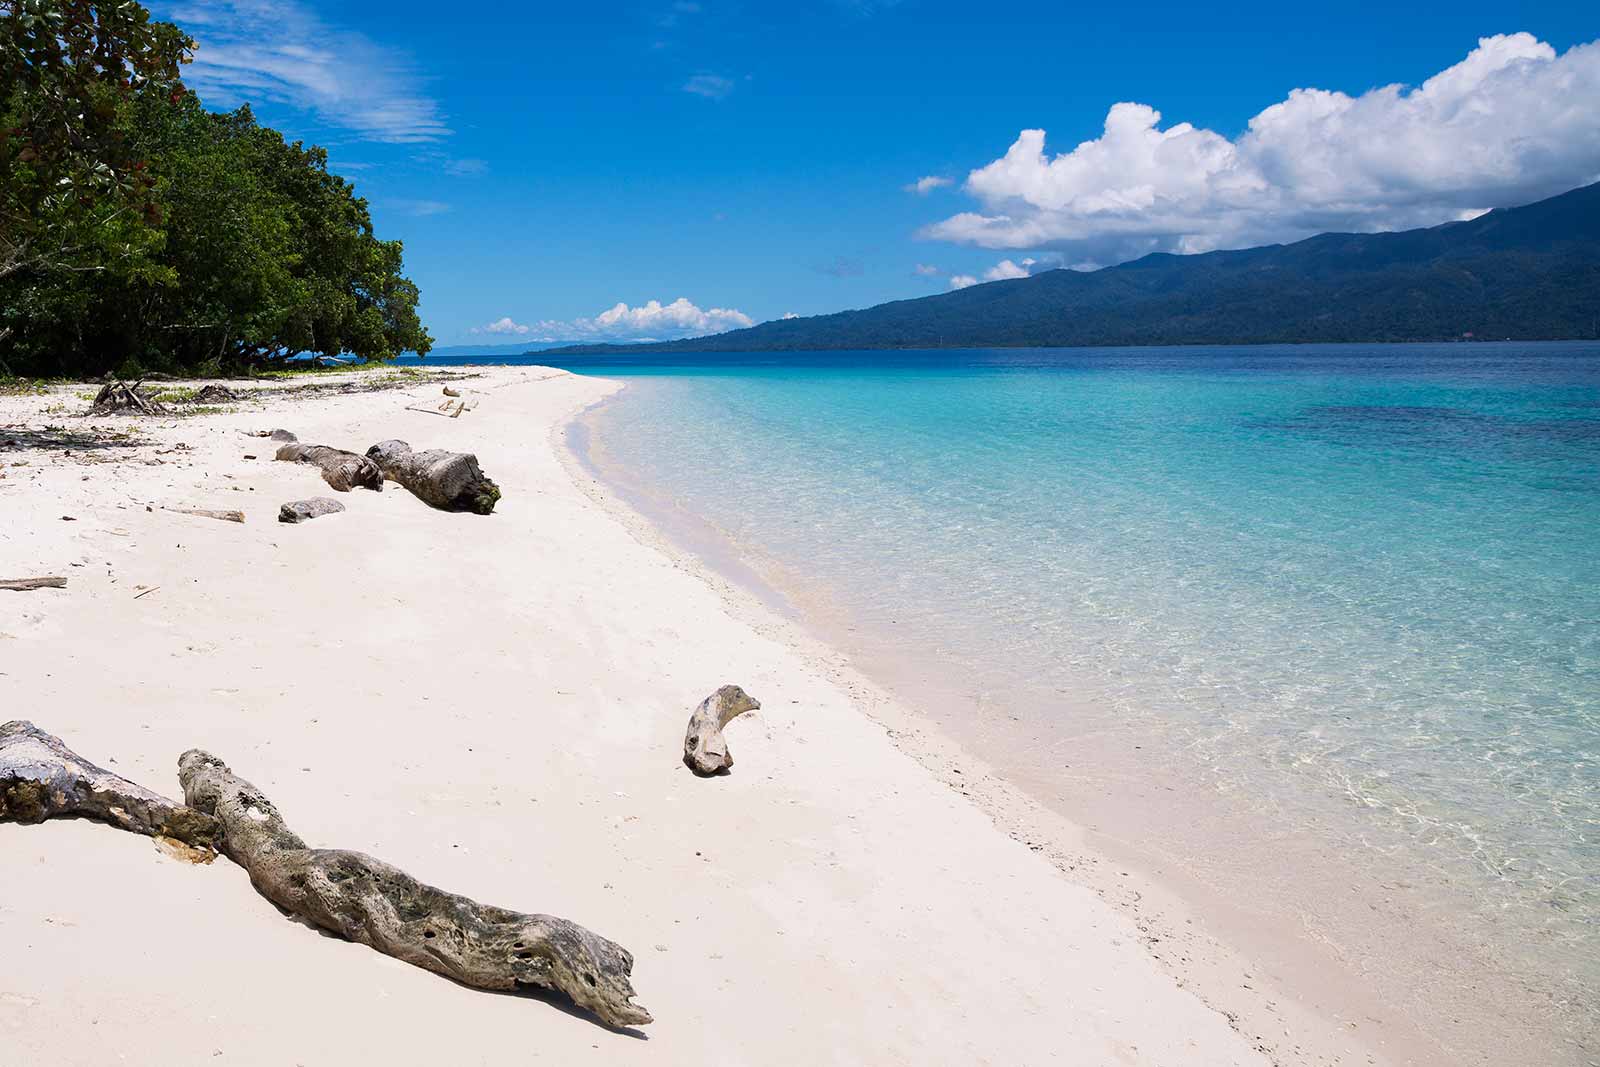 Maluku Islands: Saparua offers the best beaches with crystal clear water with pretty much no one around.